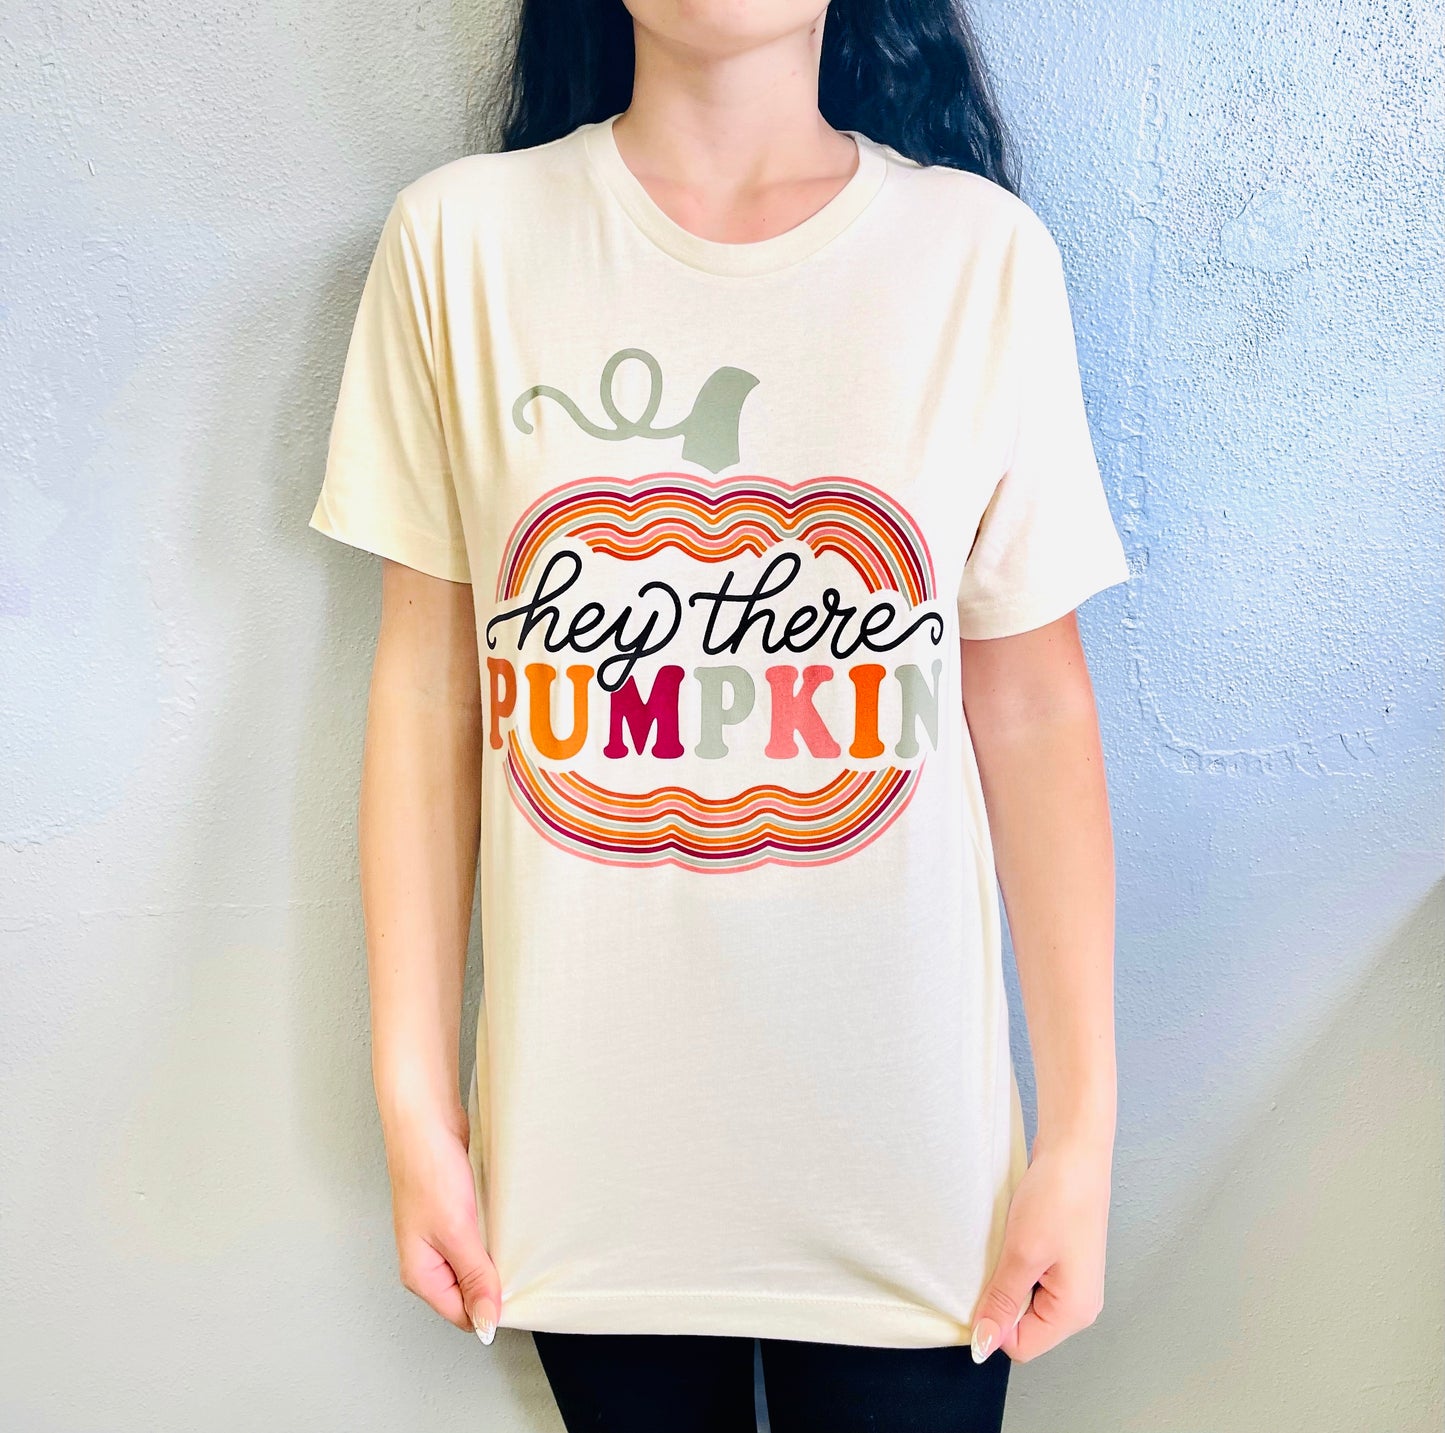 SMALL TOWN SOCIETY- “Hey There Pumpkin” Graphic Tee